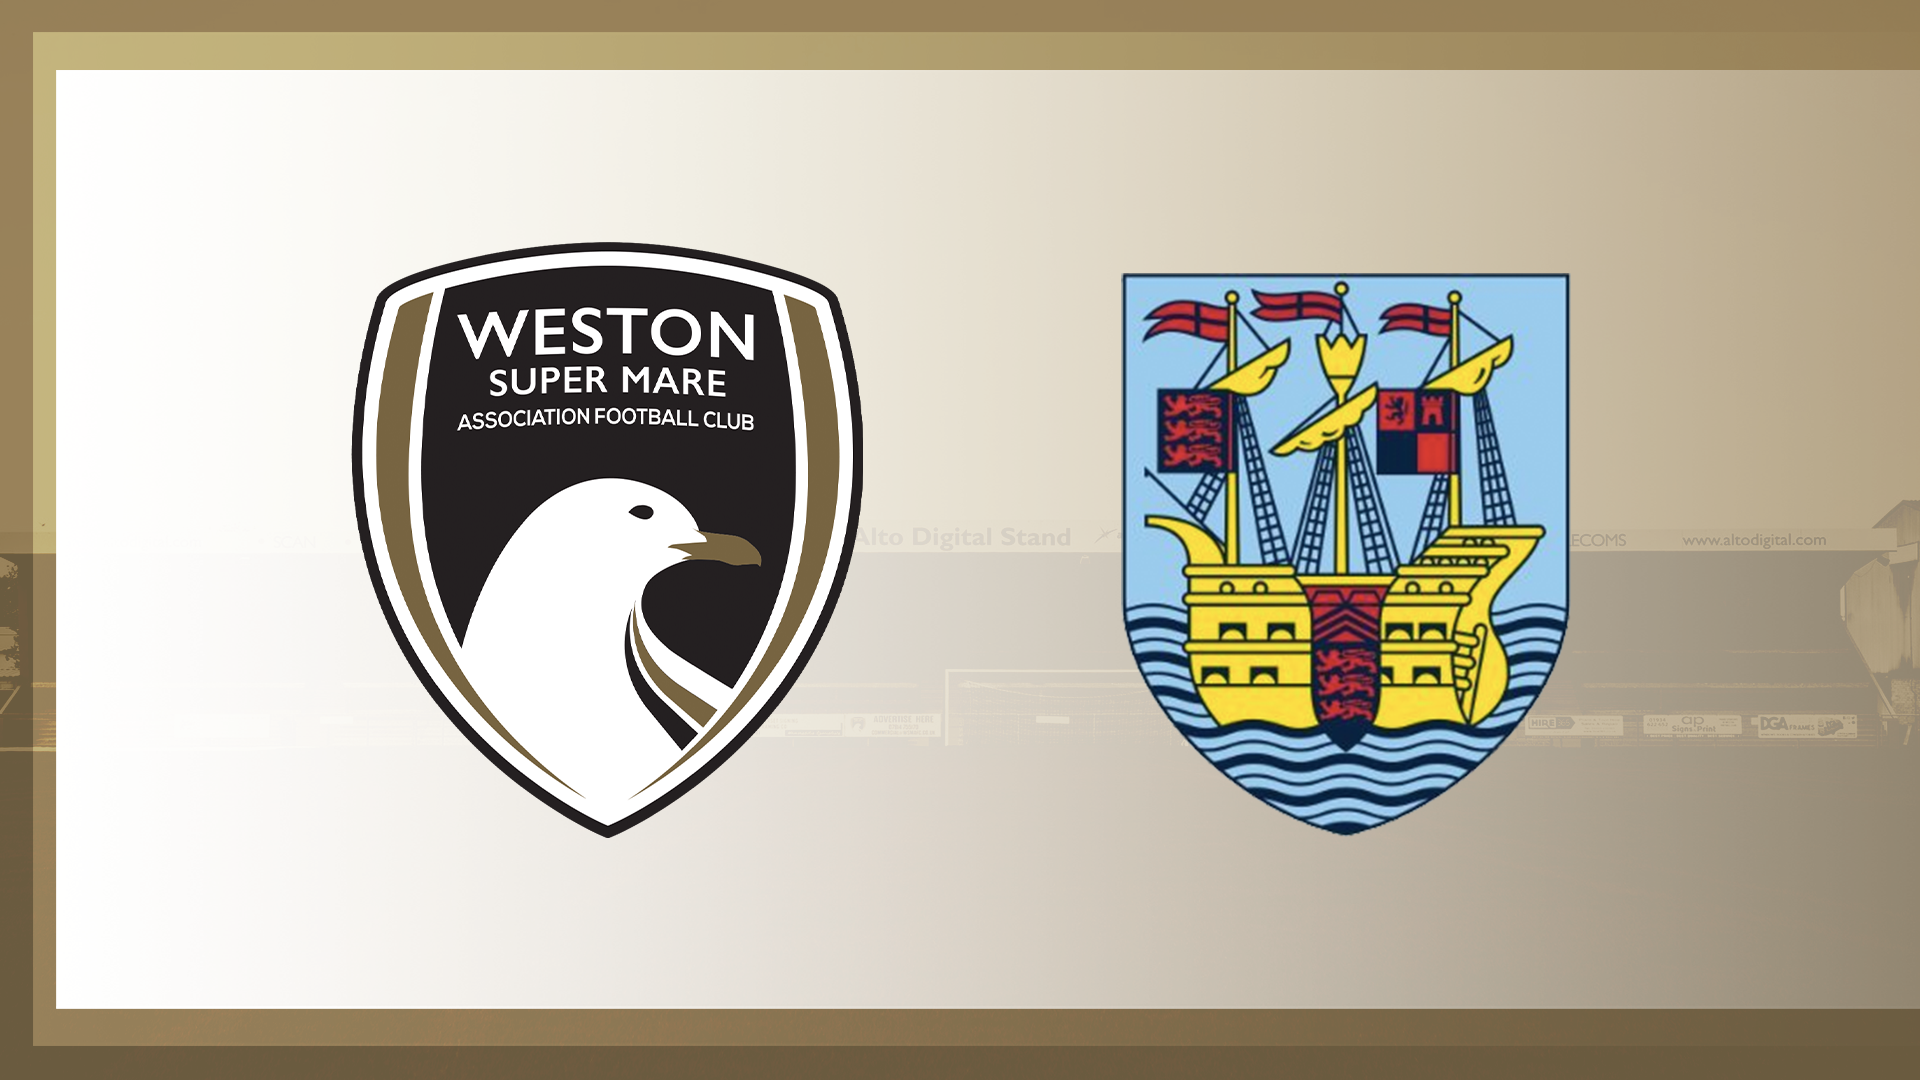 Weymouth F.C. Wallpapers